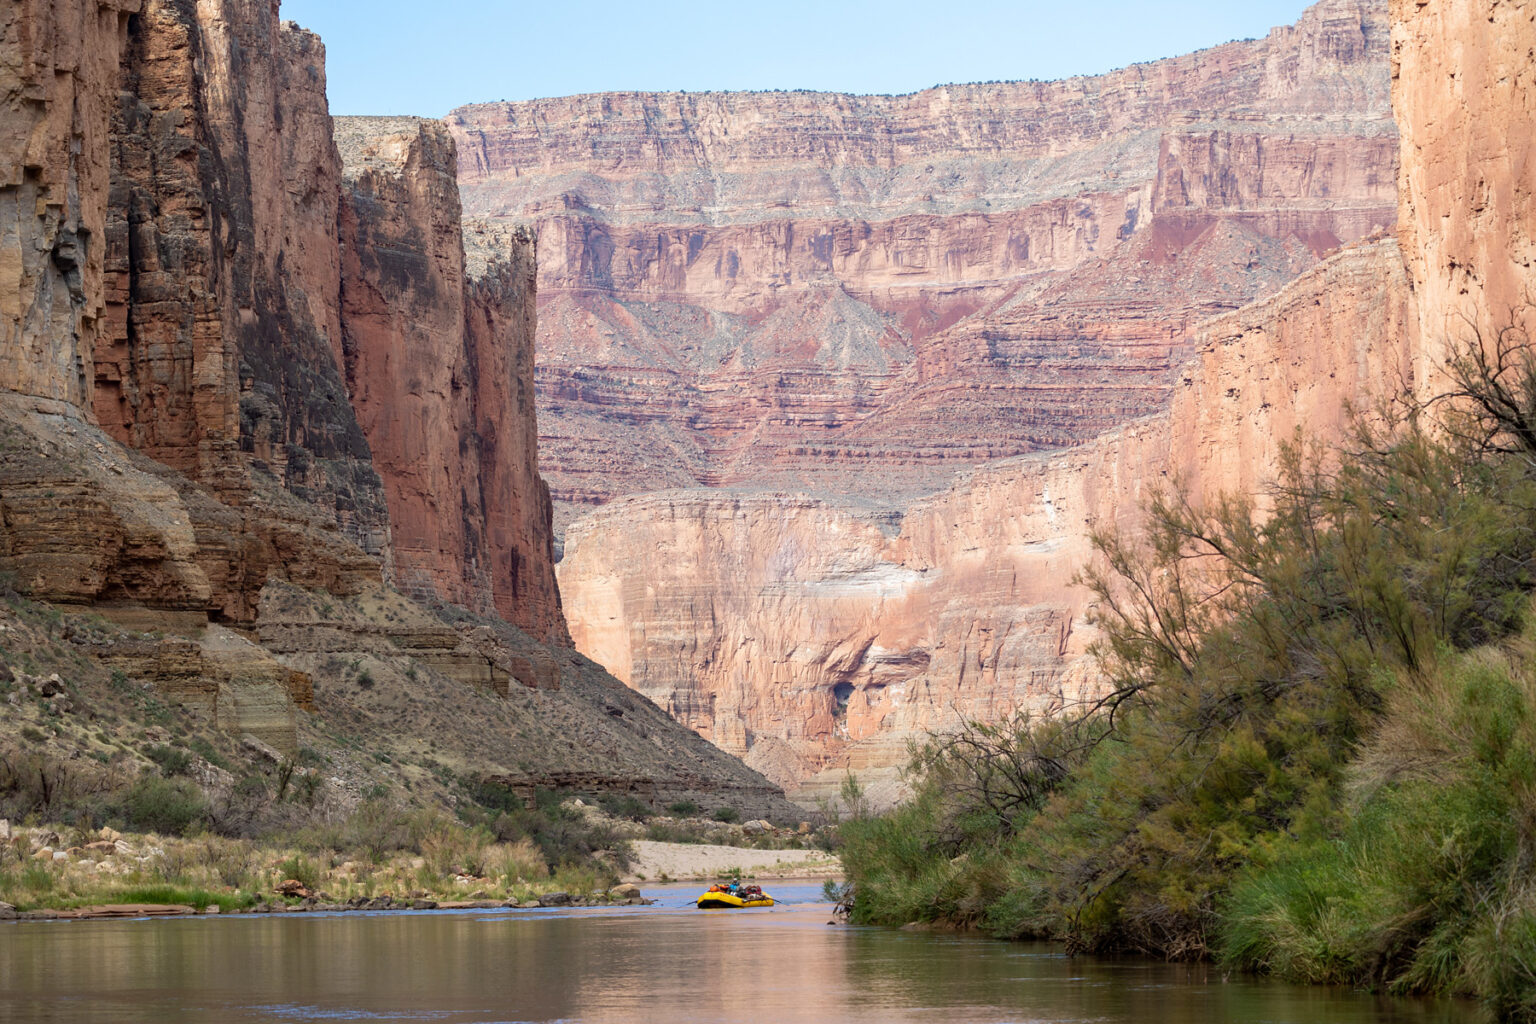 OARS raft floats between tamarisk-covered banks of the Colorado River deep in Grand Canyon